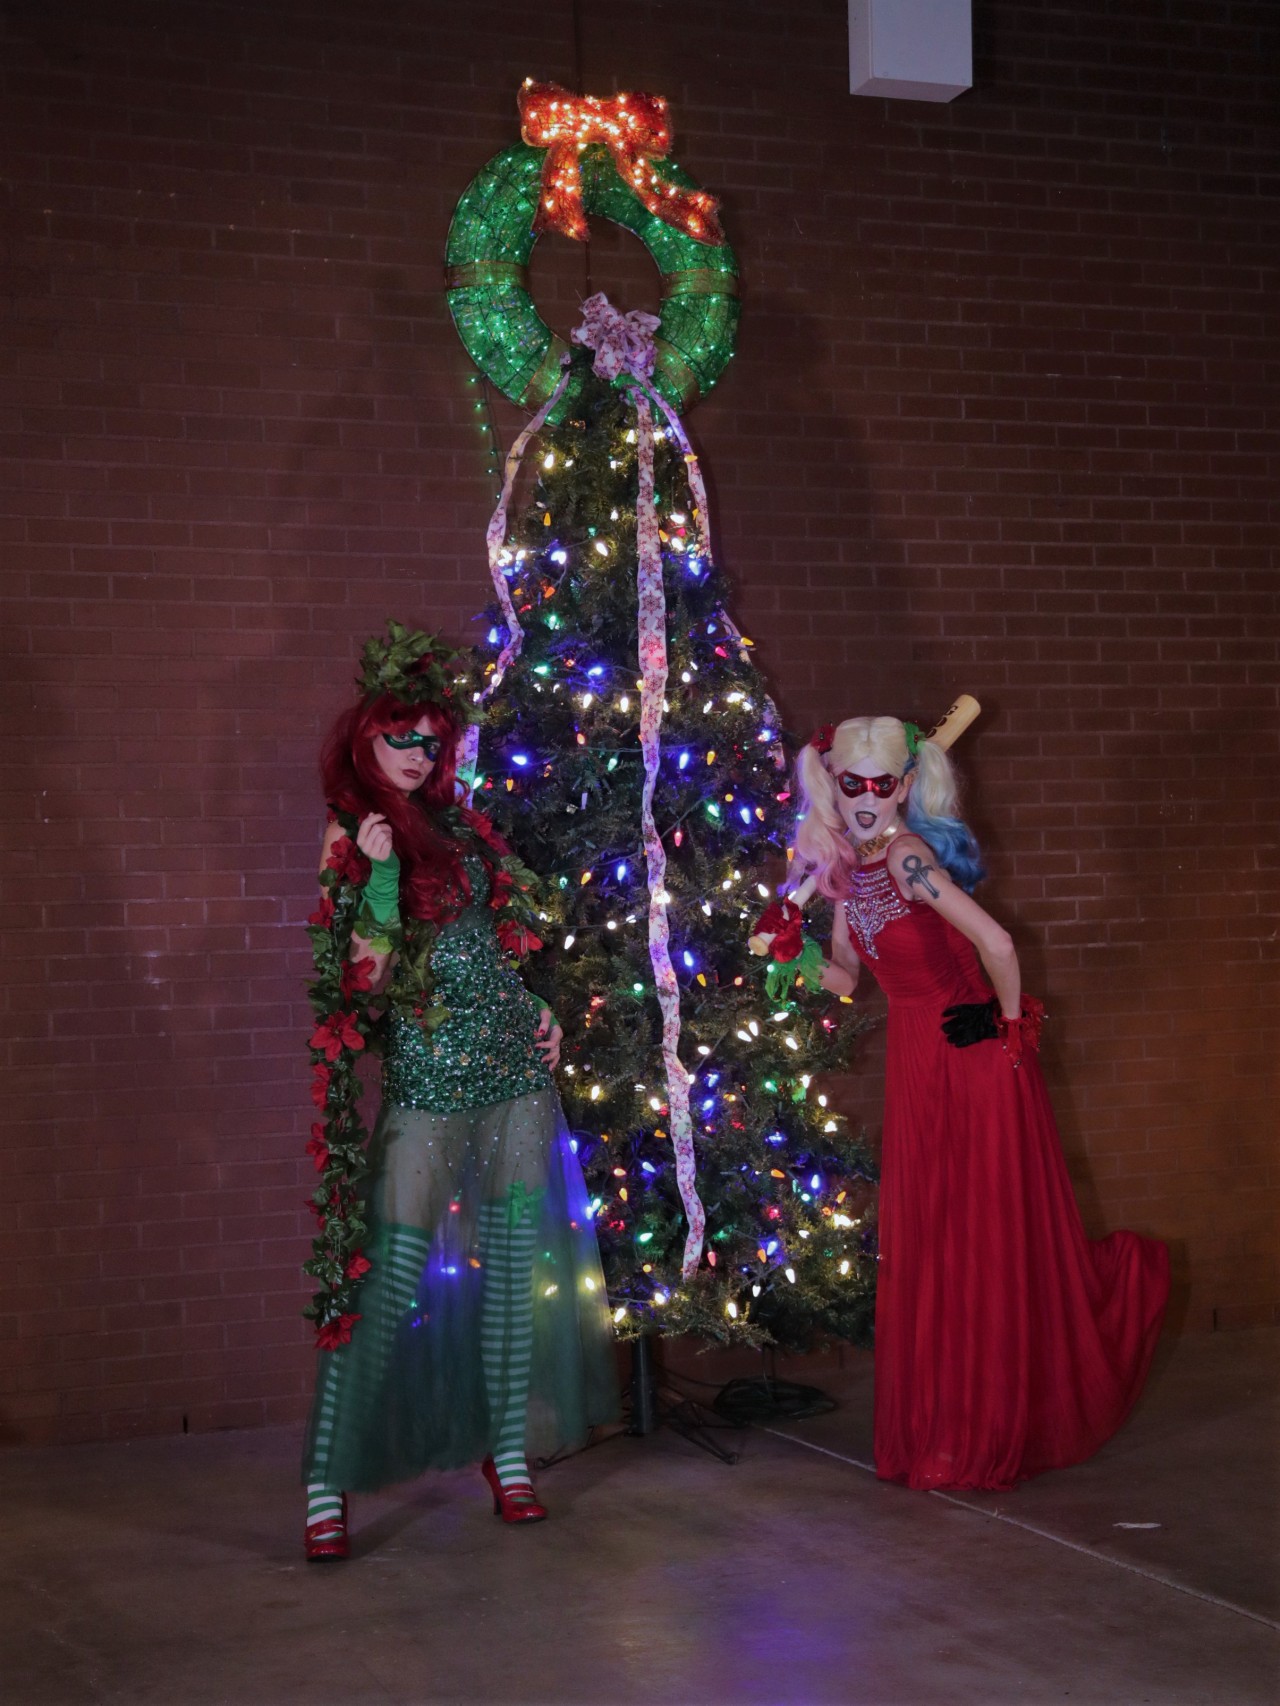 Holiday Ivy & Harley:Other model: https://www.facebook.com/nightwingingitsoloModel: https://www.facebook.com/DollModelPage
Photographer:
https://www.facebook.com/One-Motion-Media-1957716361010248 #me#poisonivy#harleyquinn#cosplay#gothamsiren